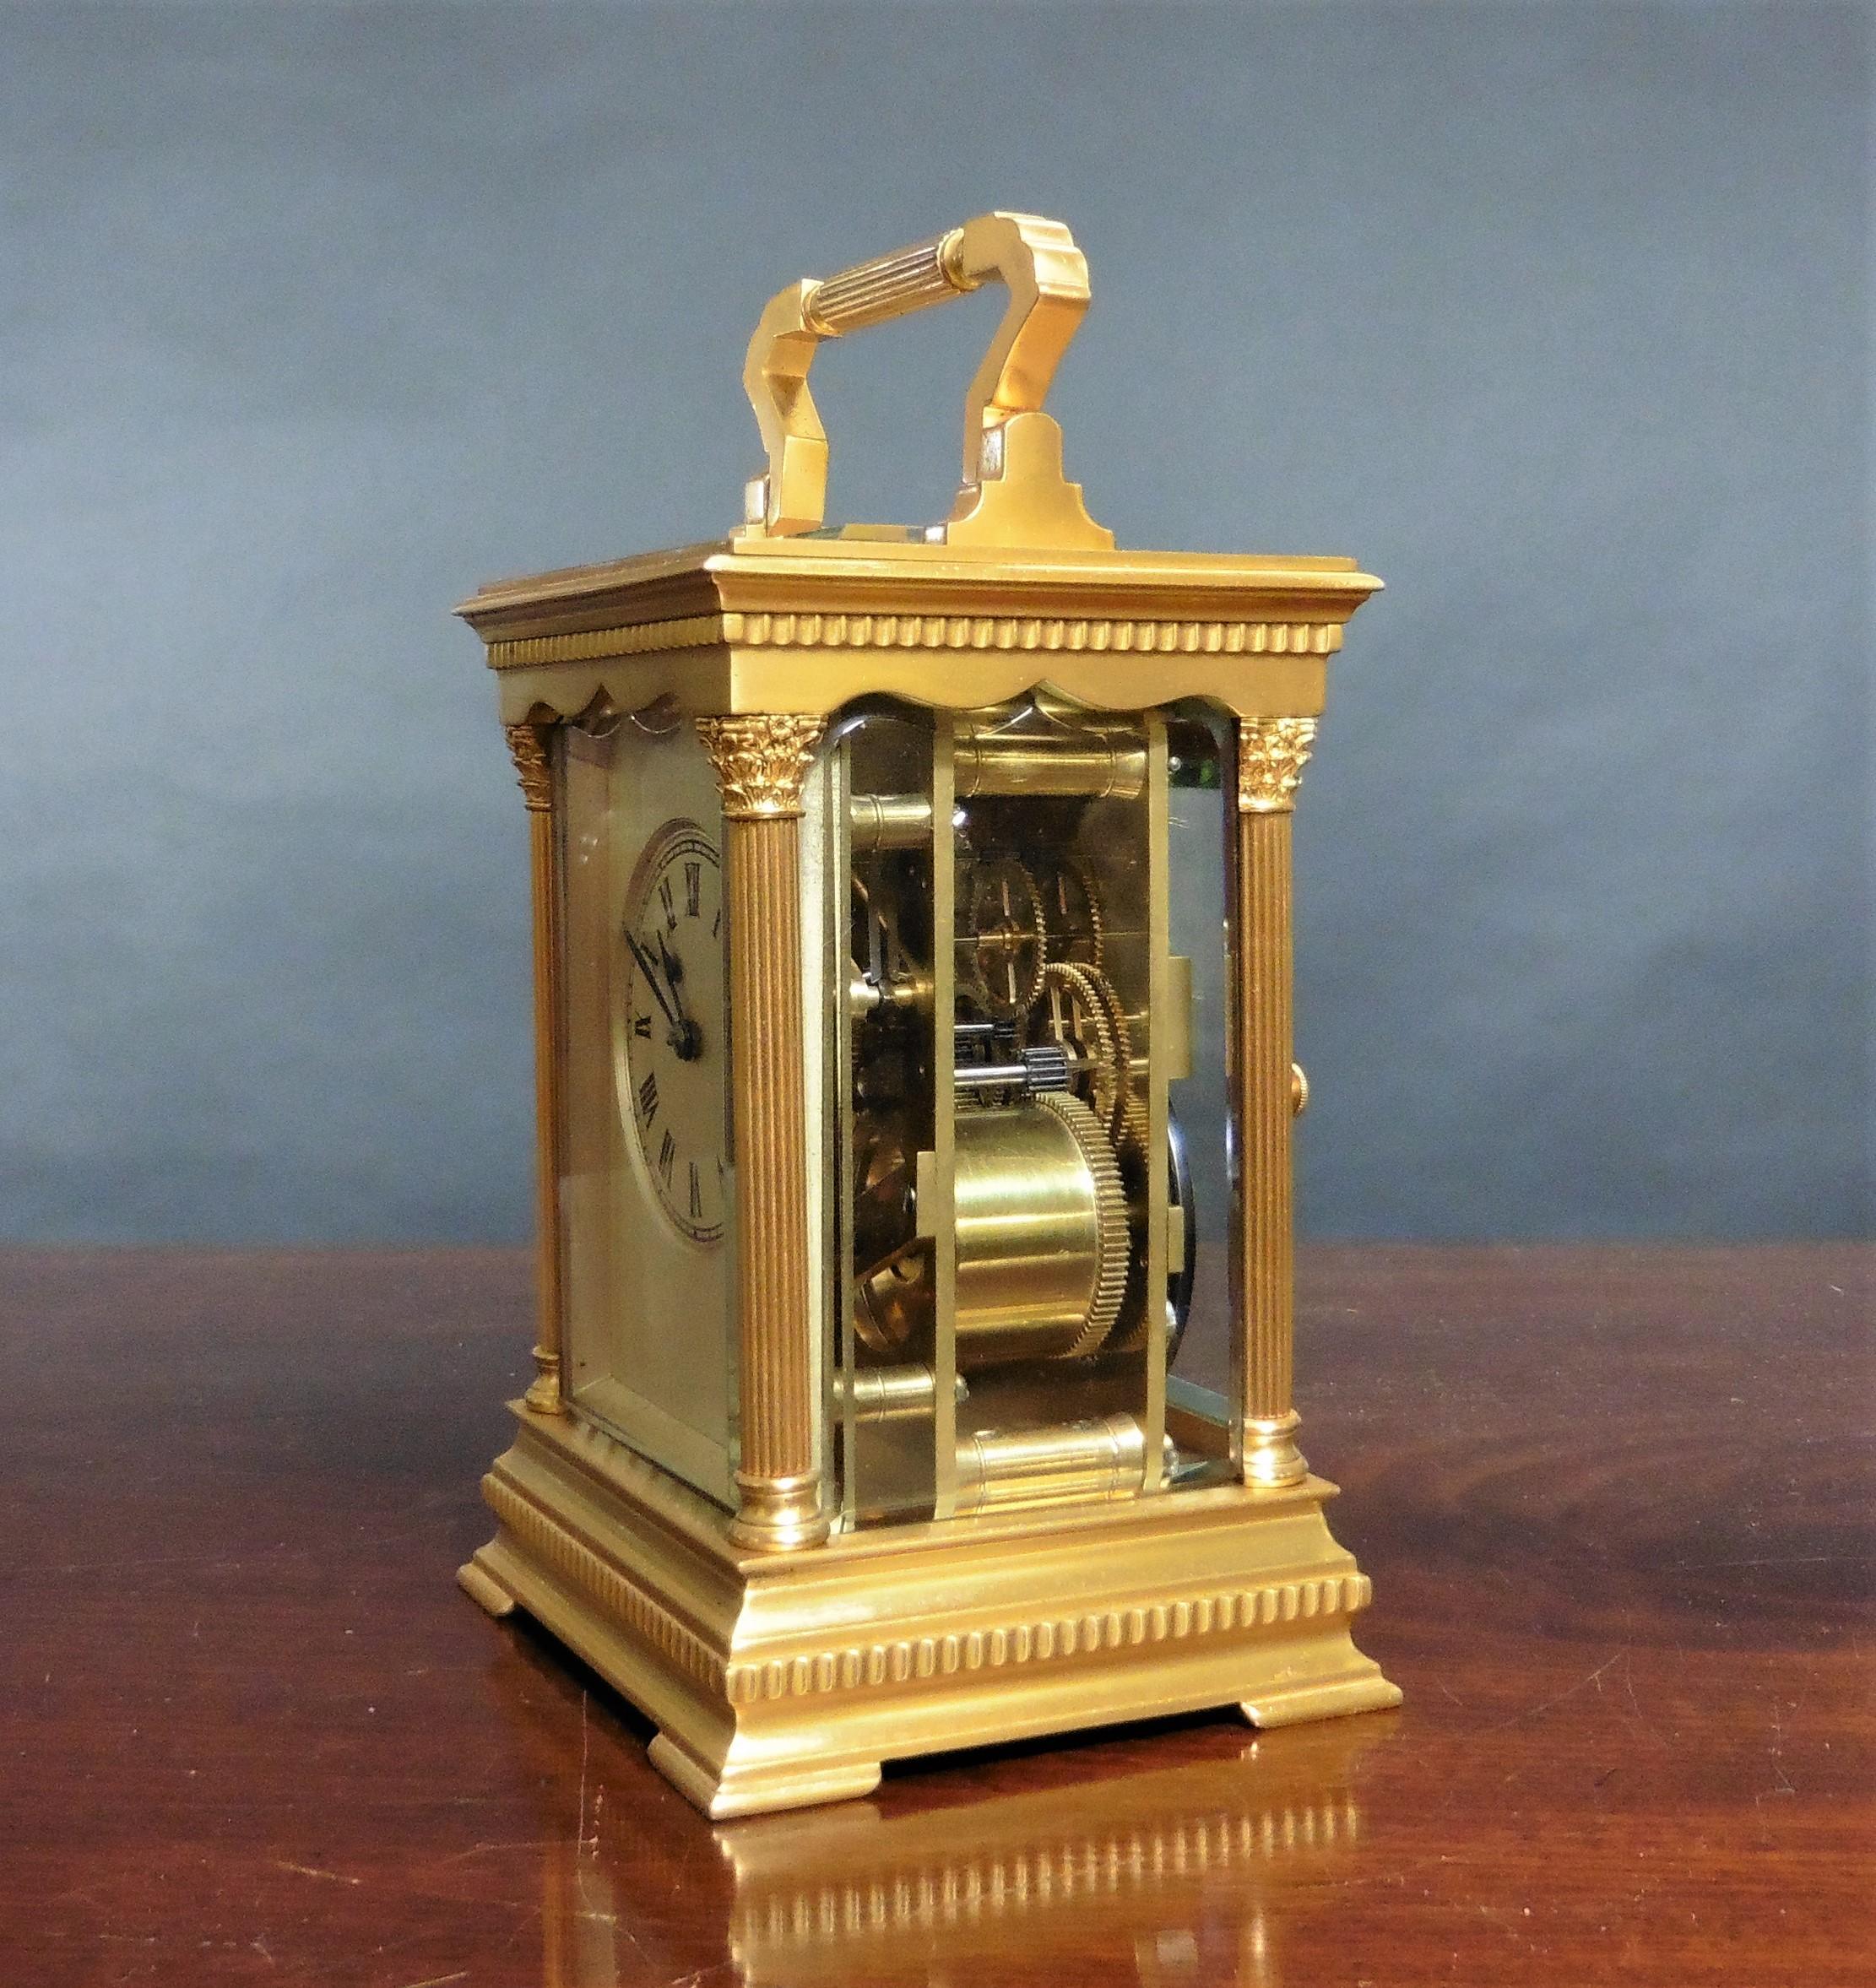 Victorian gilded striking carriage clock



Victorian carriage clock in a fine gilded case standing on a raised base with dentil moulding and resting on outswept pad feet, reeded pillars with Corinthian capitals below a shaped canopy with dentil